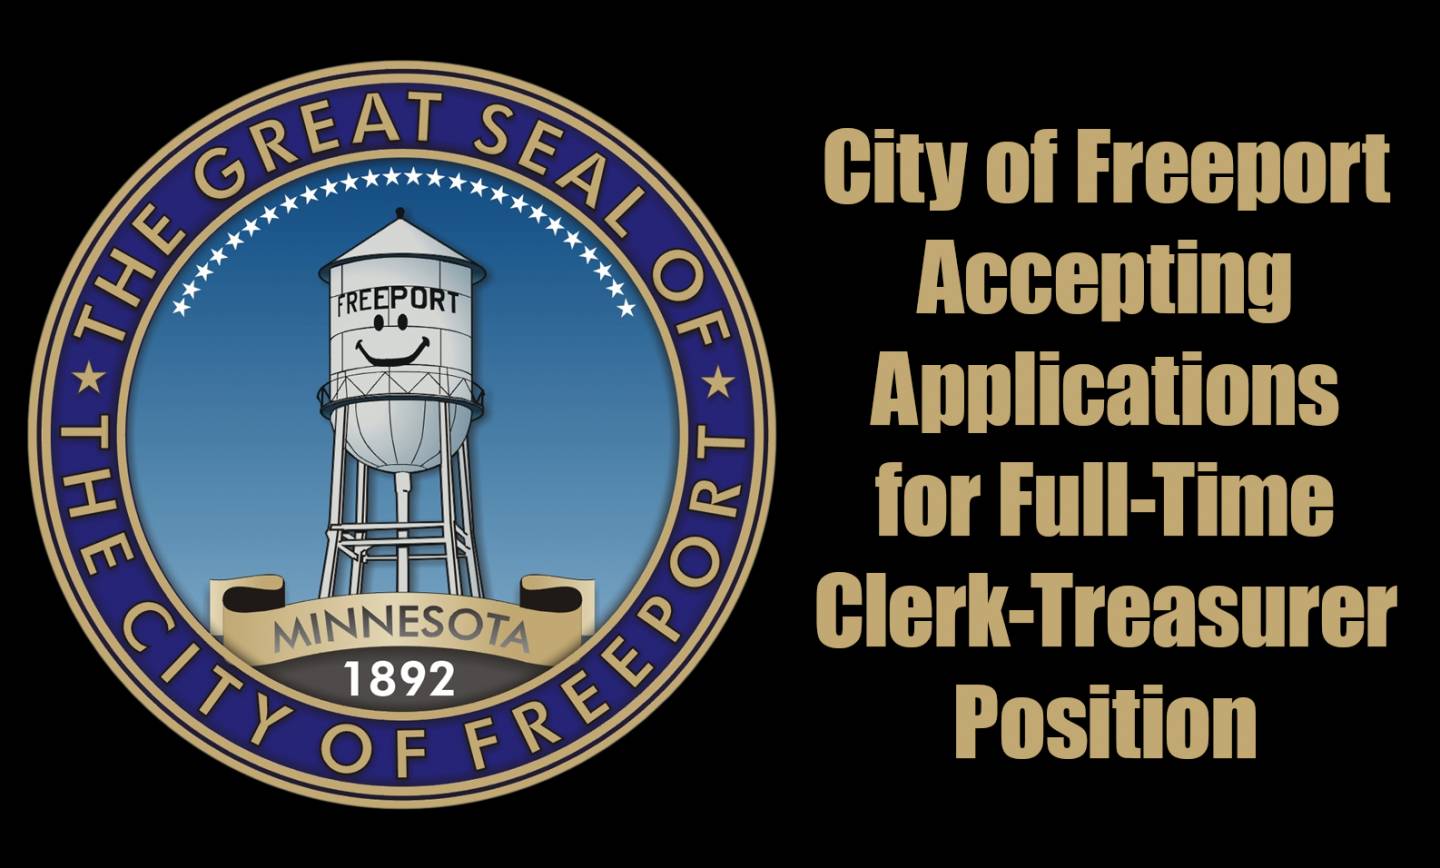 The City of Freeport is accepting applications for a Clerk-Treasurer